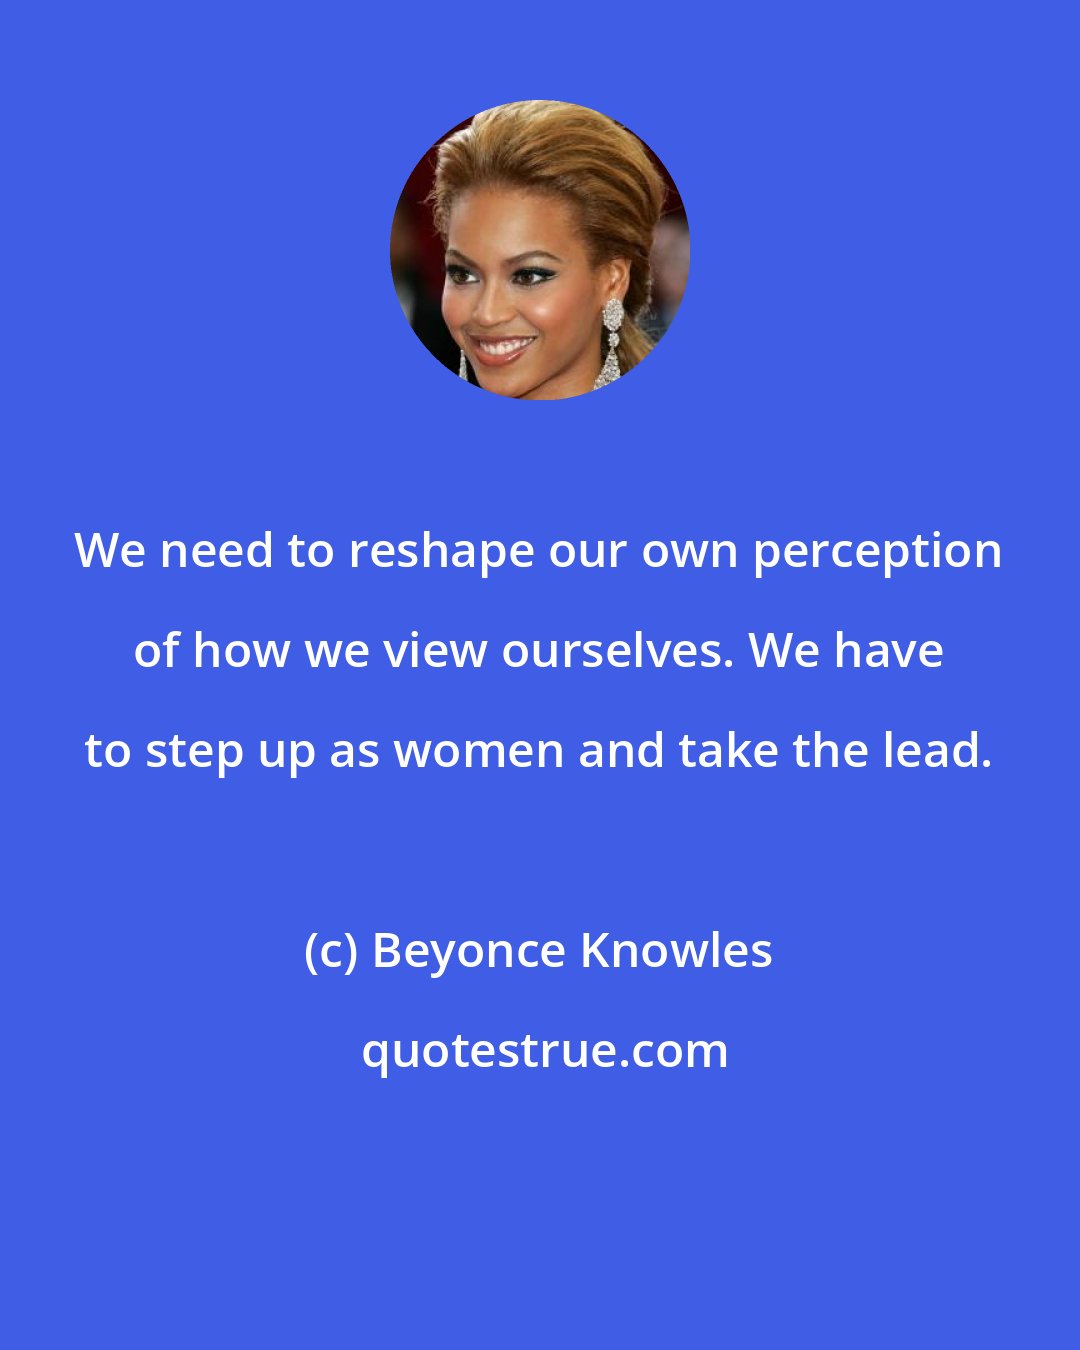 Beyonce Knowles: We need to reshape our own perception of how we view ourselves. We have to step up as women and take the lead.